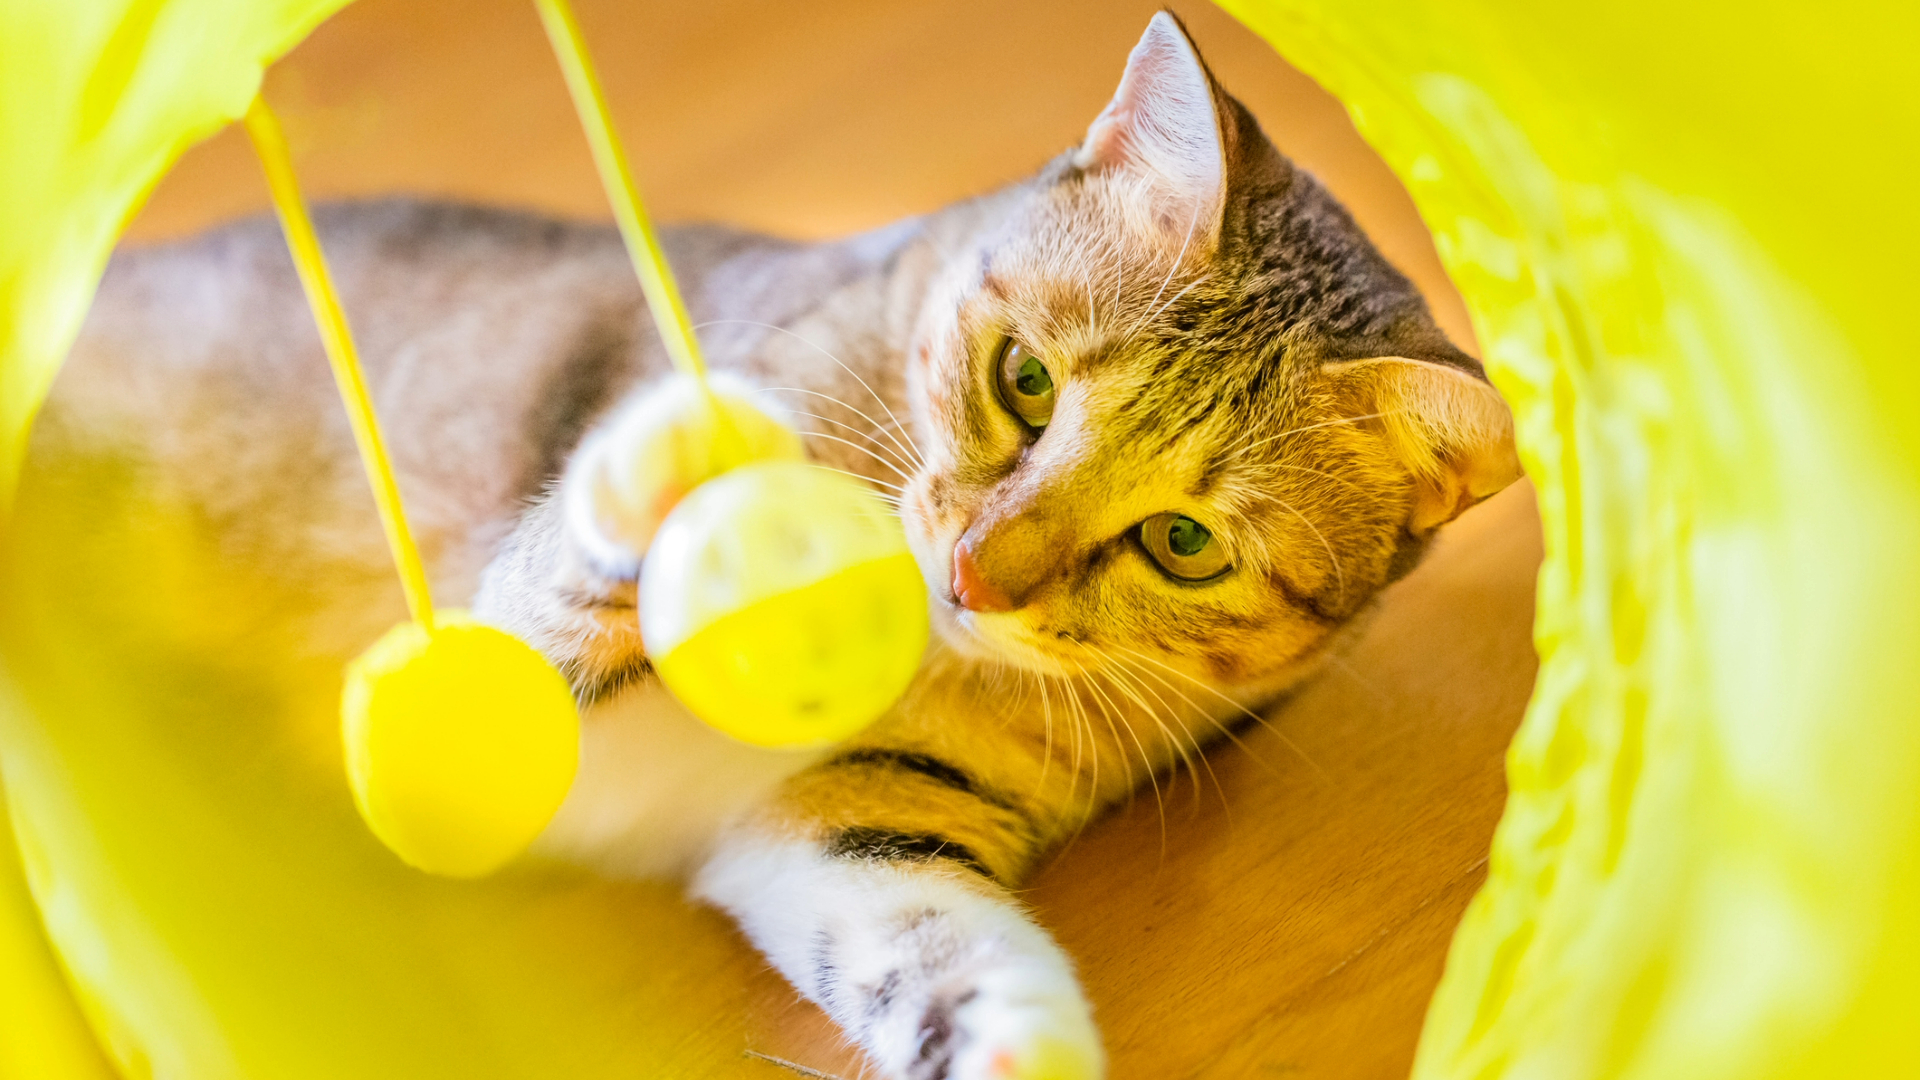 Cat playing in a yellow tunnel toy